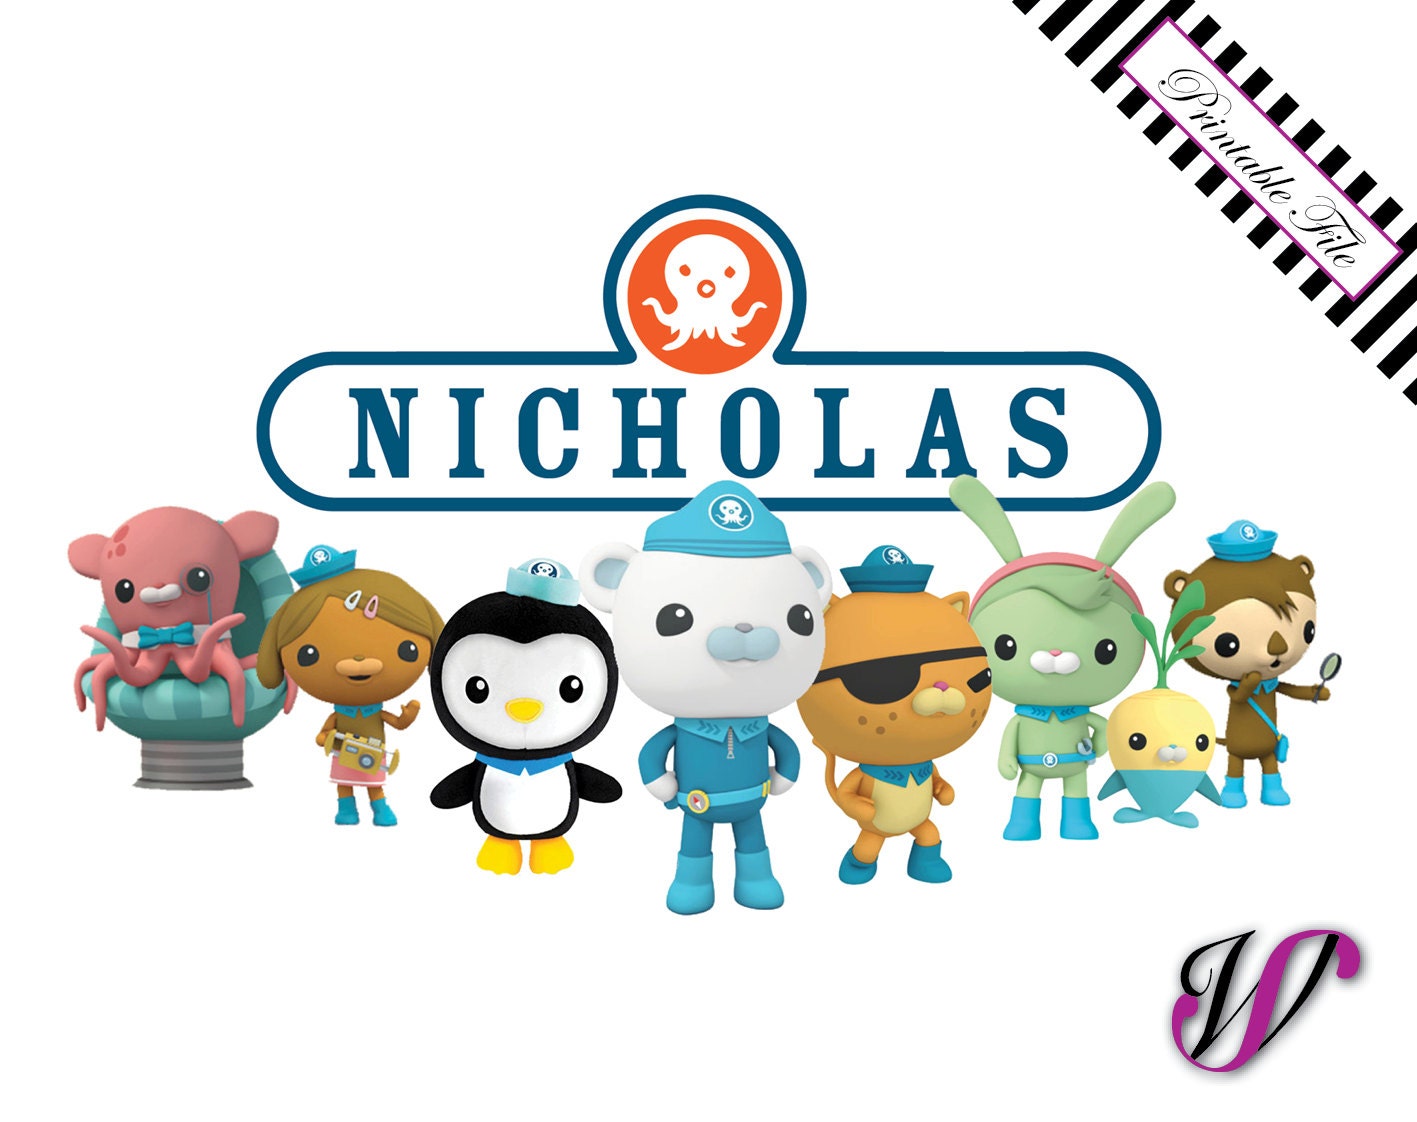 Iron-On Transfer Octonauts Characters with by aSugarWonderland